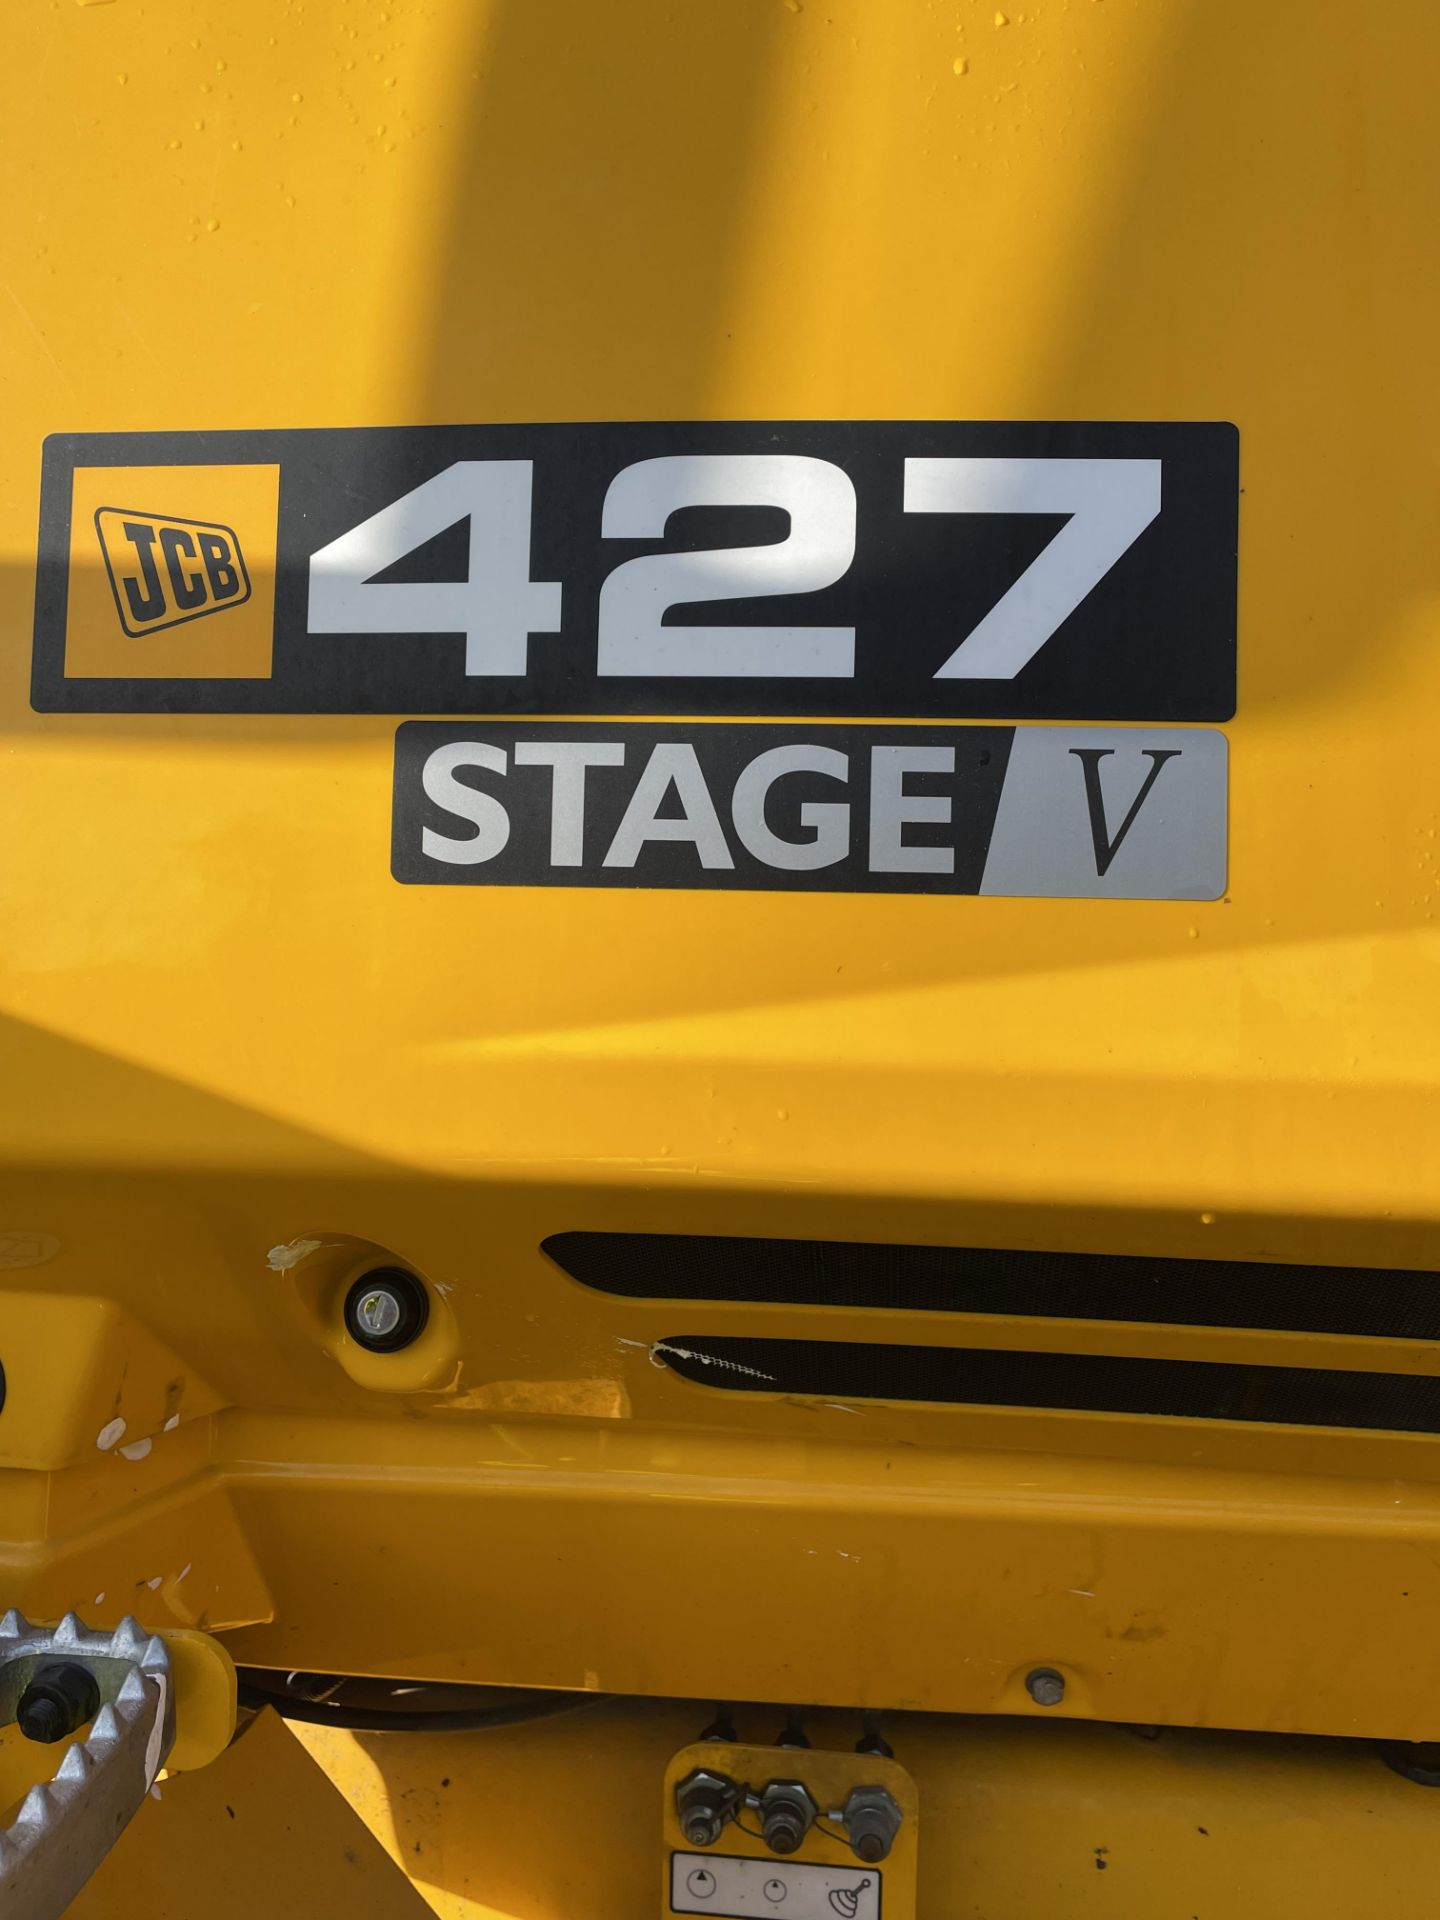 JCB, Wastemaster 427 S5, wheel loader, PIN: JCB4A5A9CK2679907 (2019) Last known Hours 2639.8, - Image 12 of 25